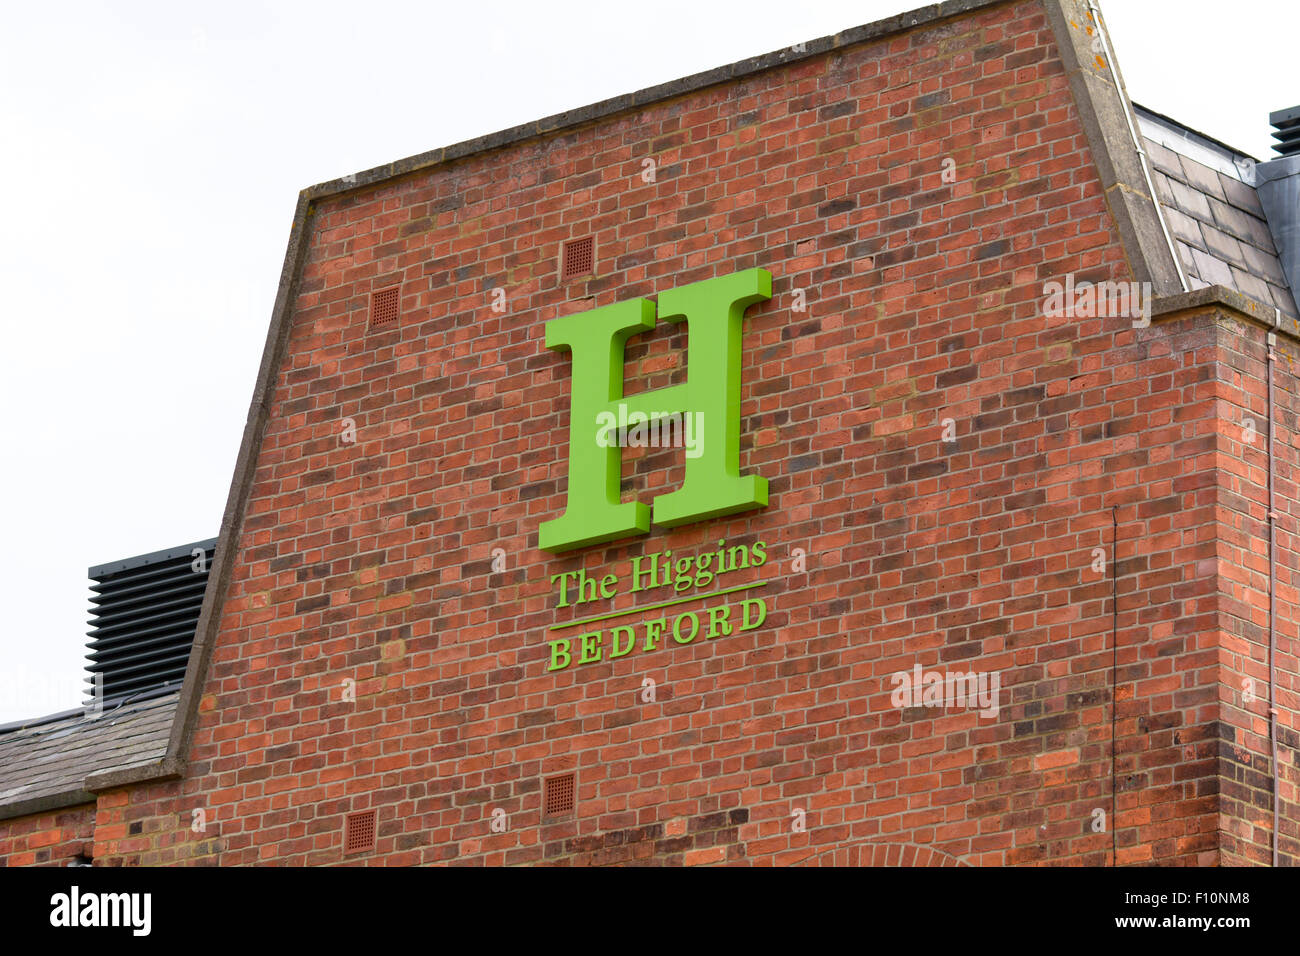 The Higgins Museum and Gallery sign and logo in Bedford, Bedfordshire ...